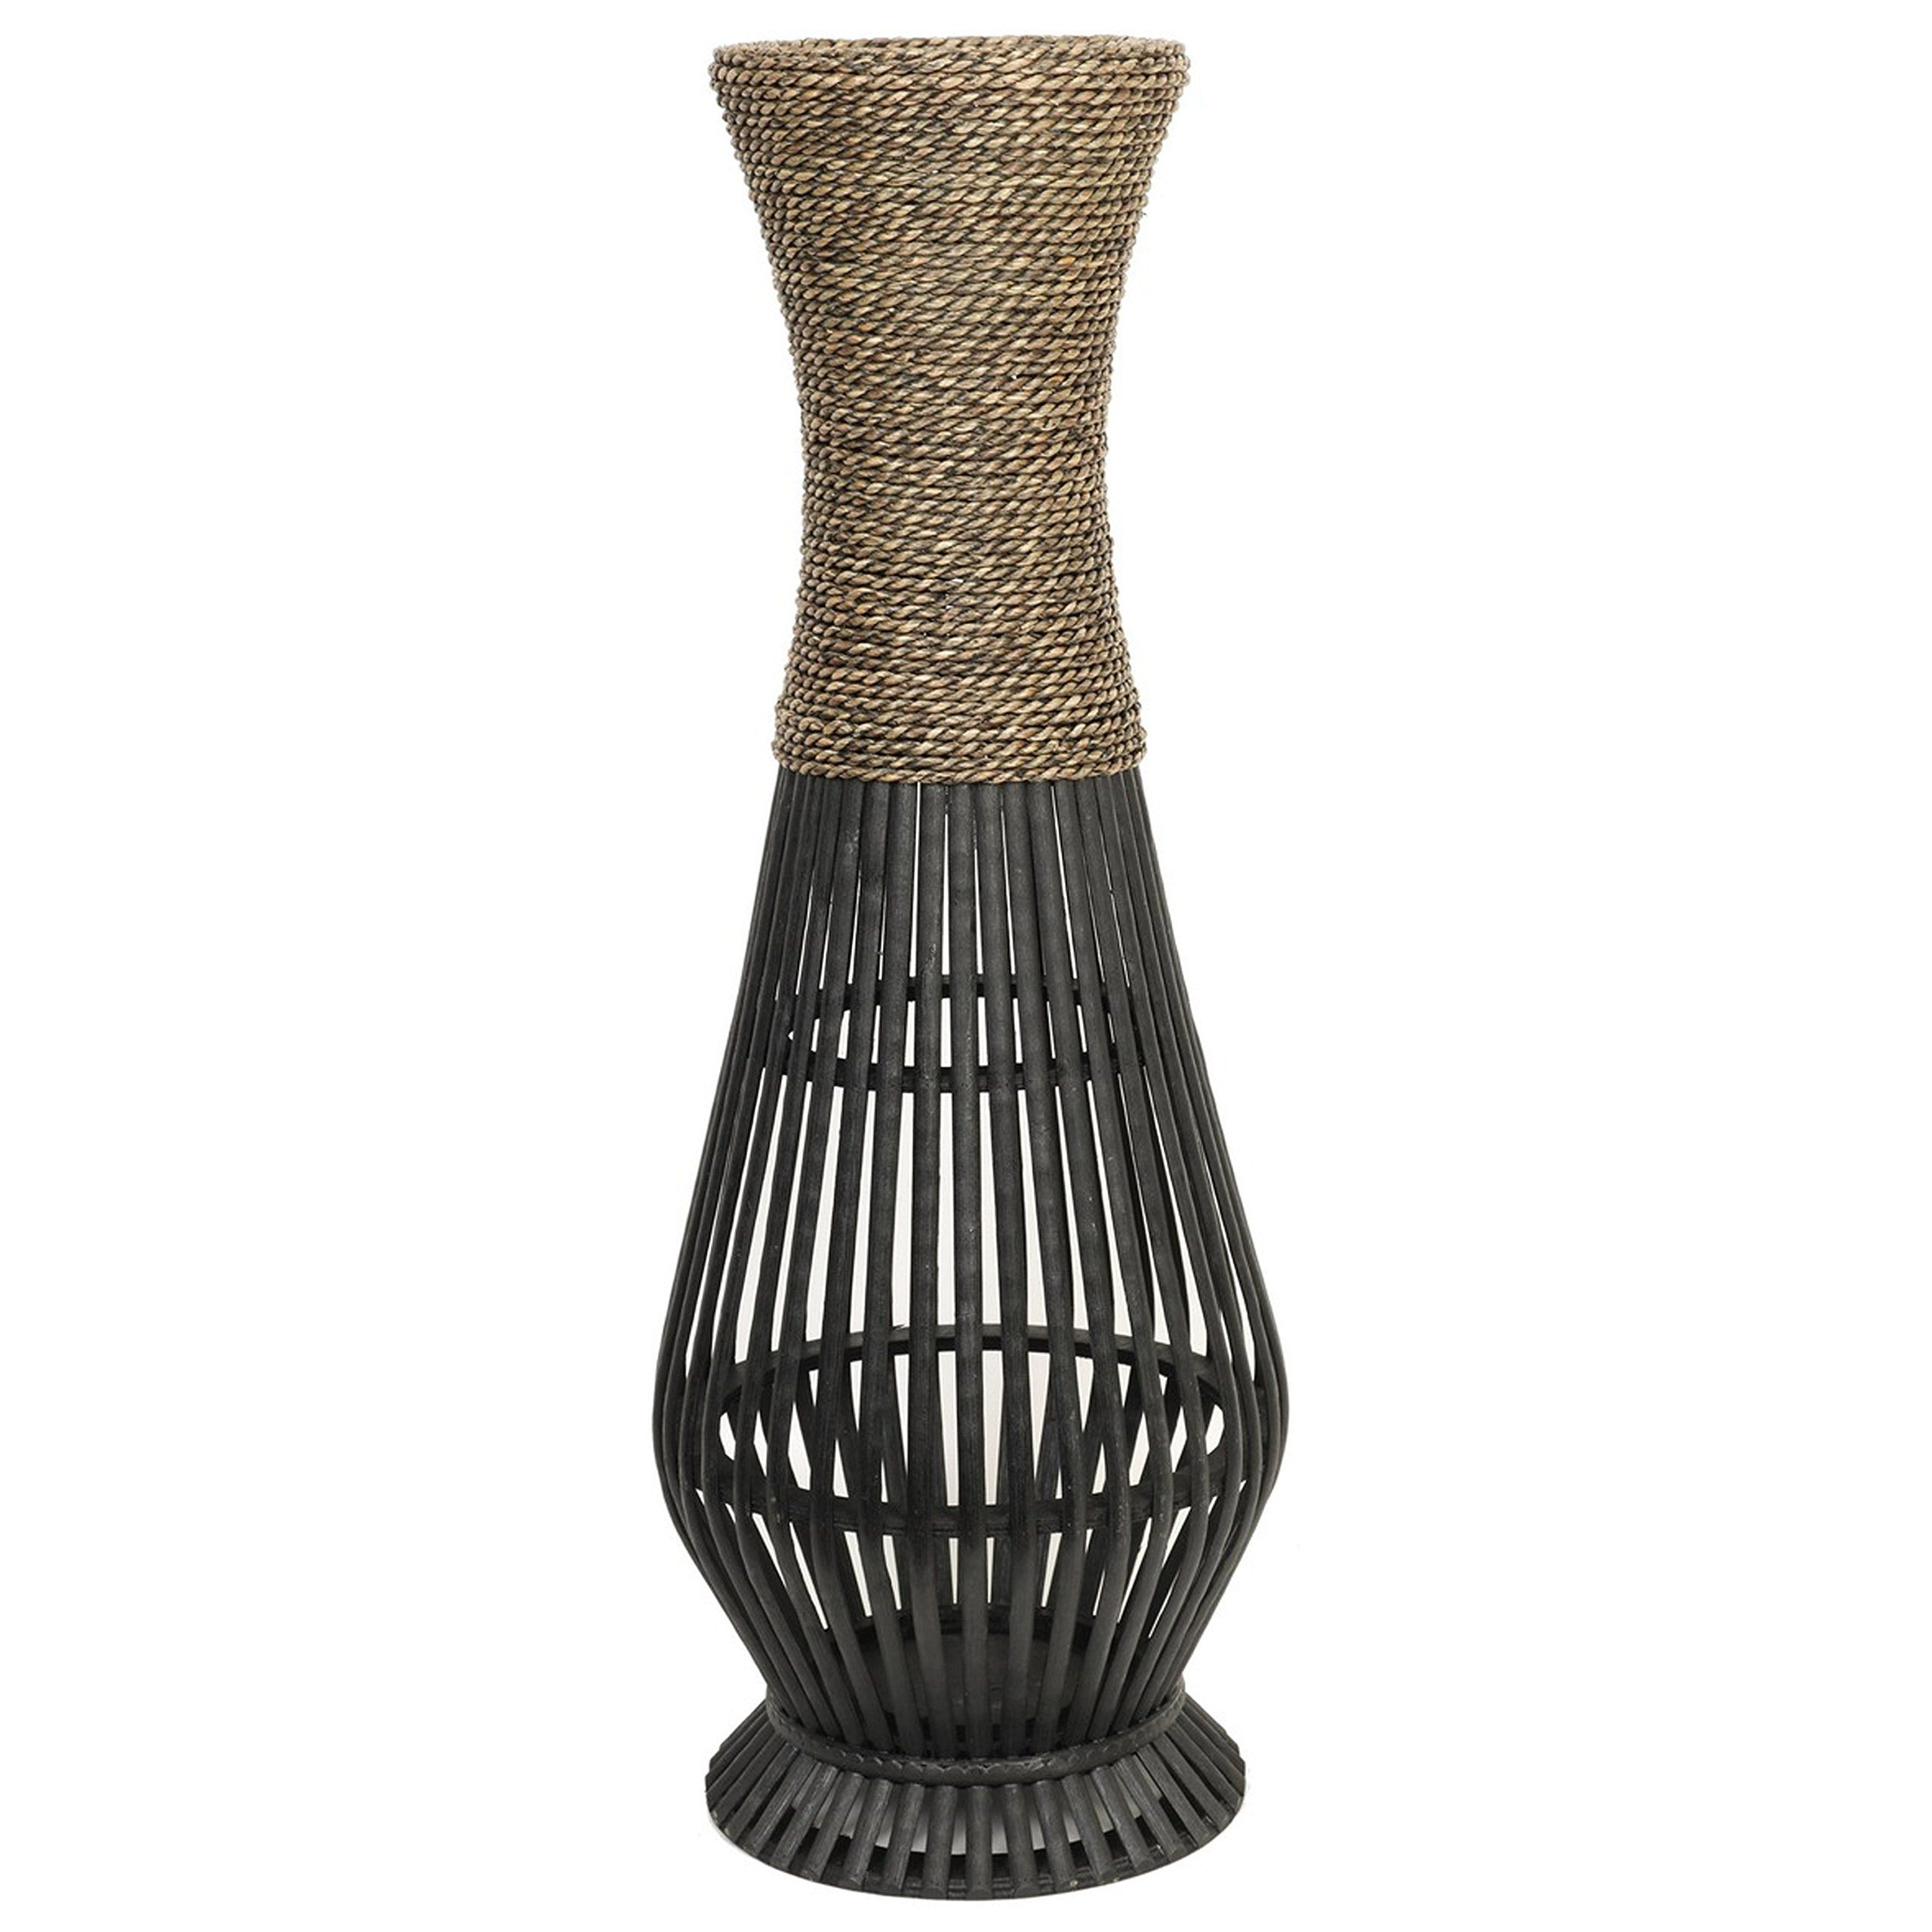 Hosley Tall Bamboo Wood Floor Vase 26 High Ideal Gift For within dimensions 2560 X 2560